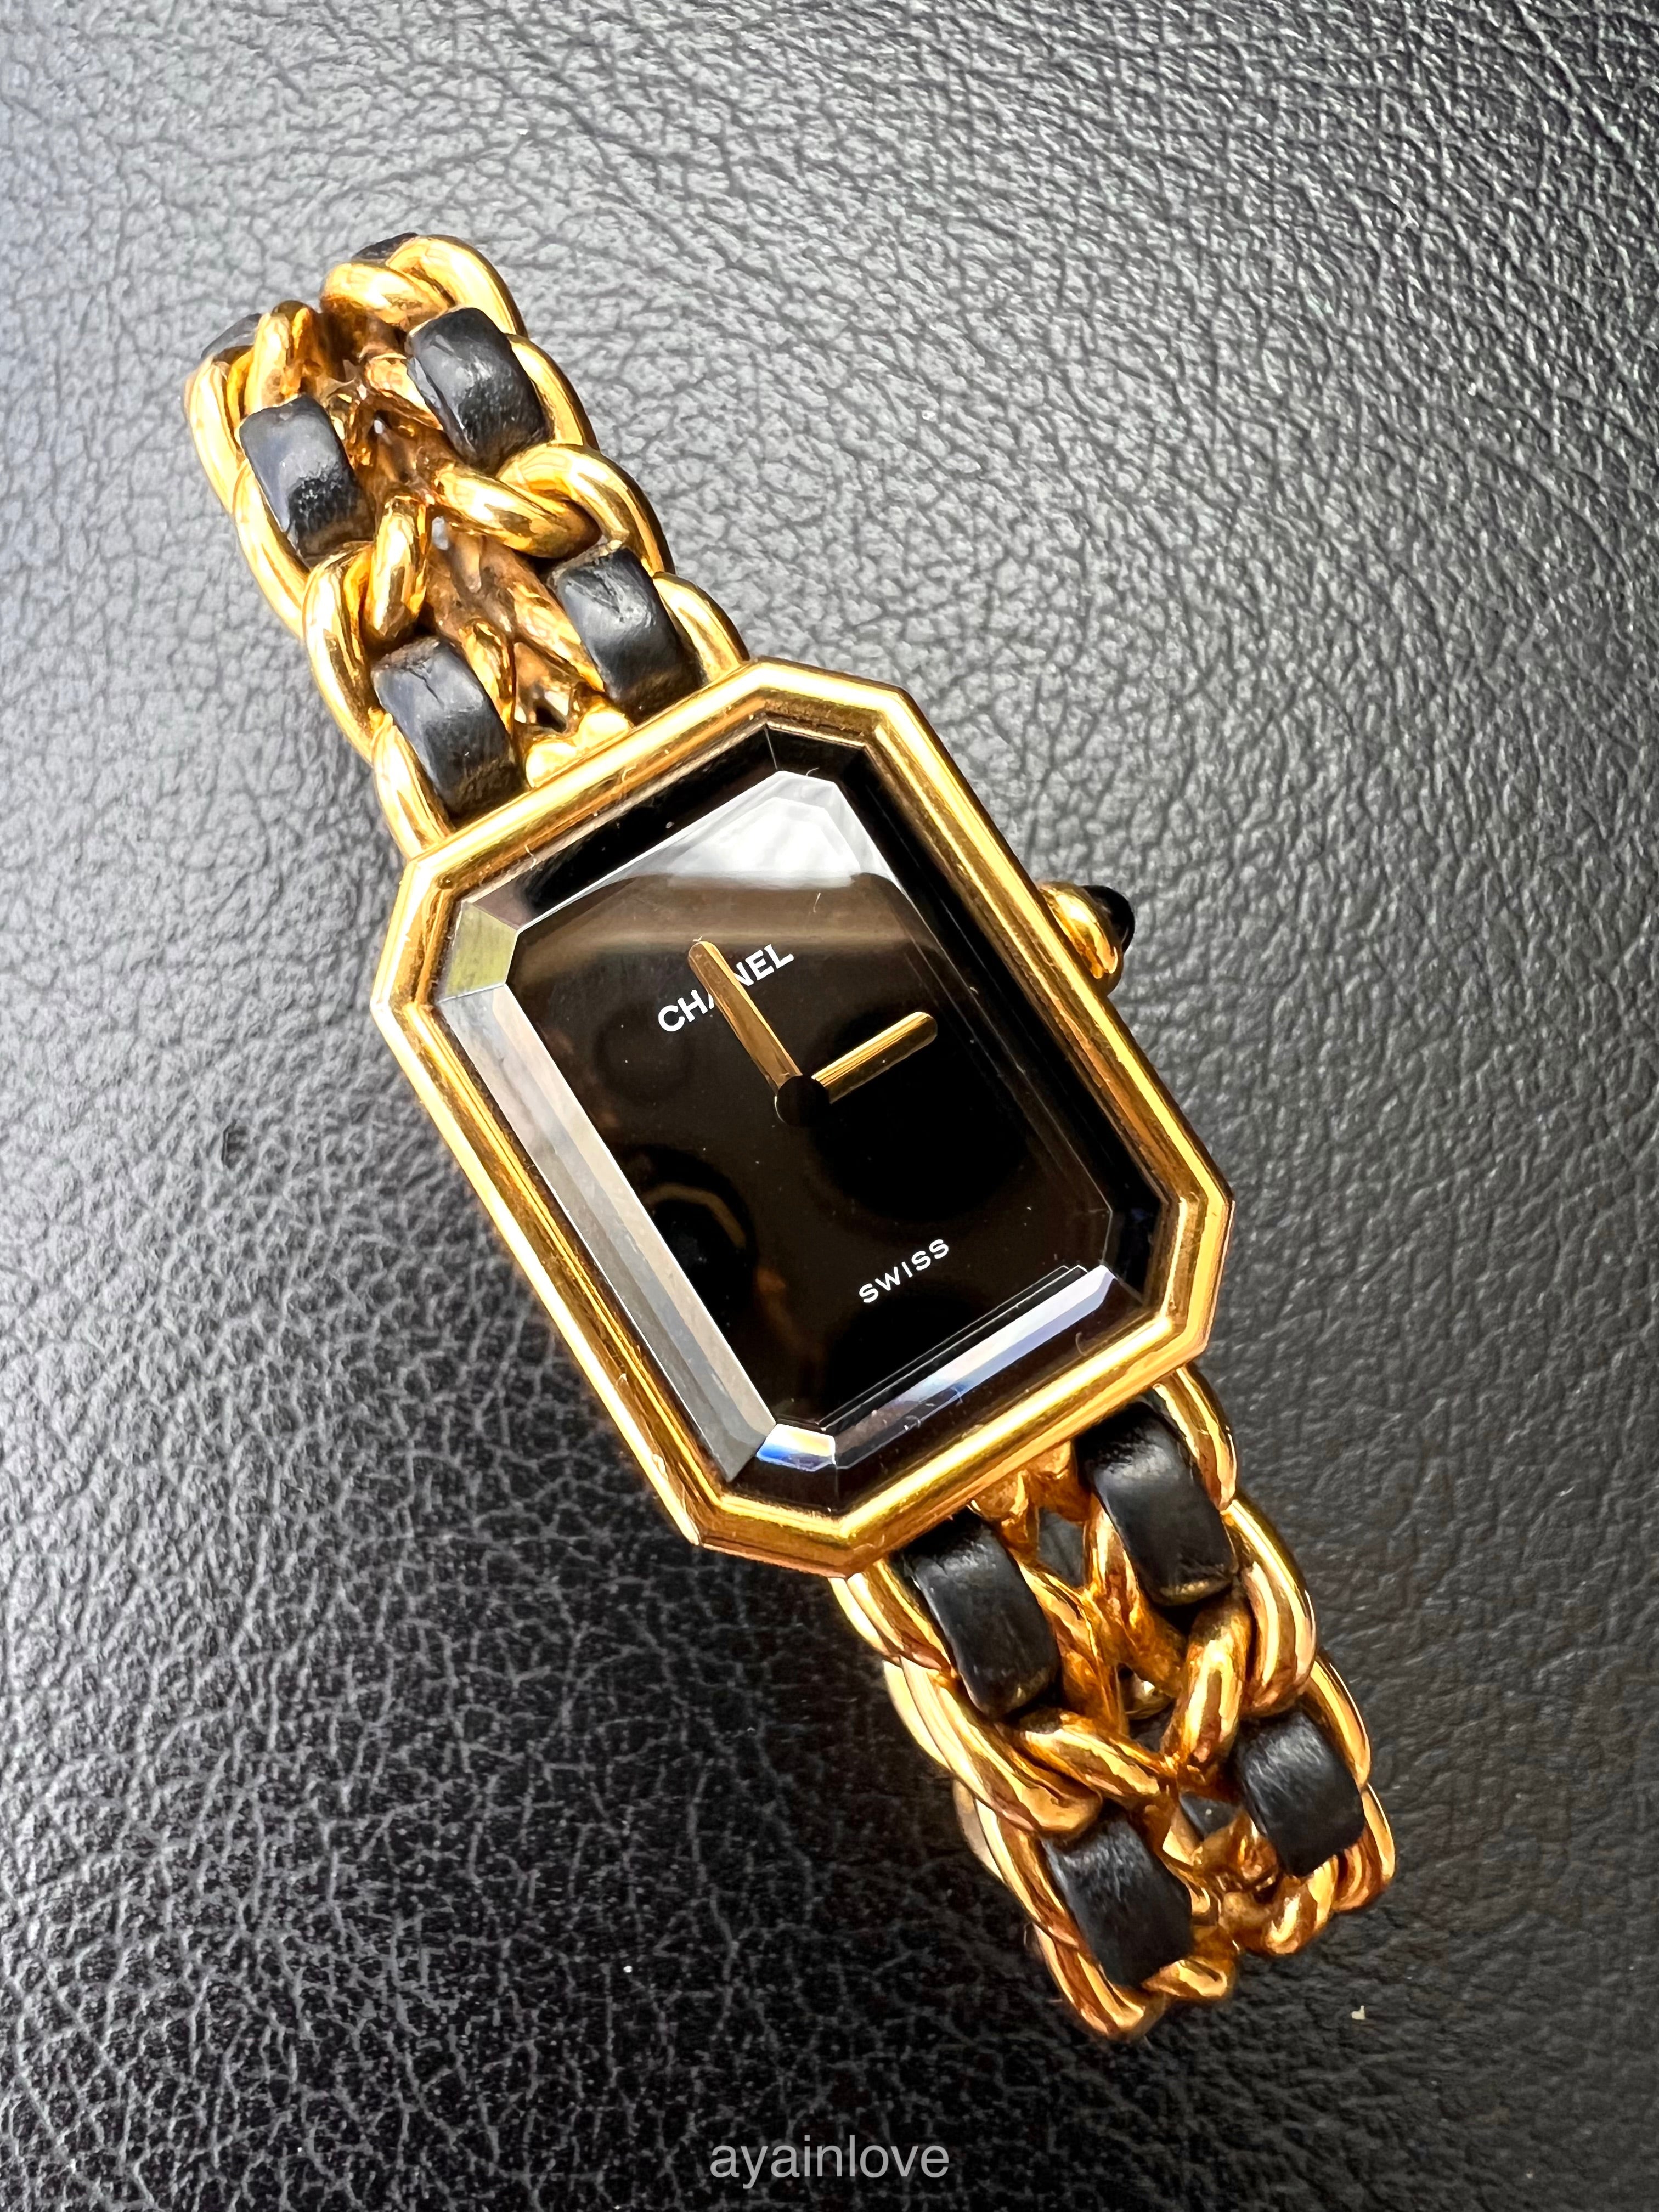 Very Rare Vintage Chanel Premier Watch with Diamond Excellent Vintage  Condition  eBay